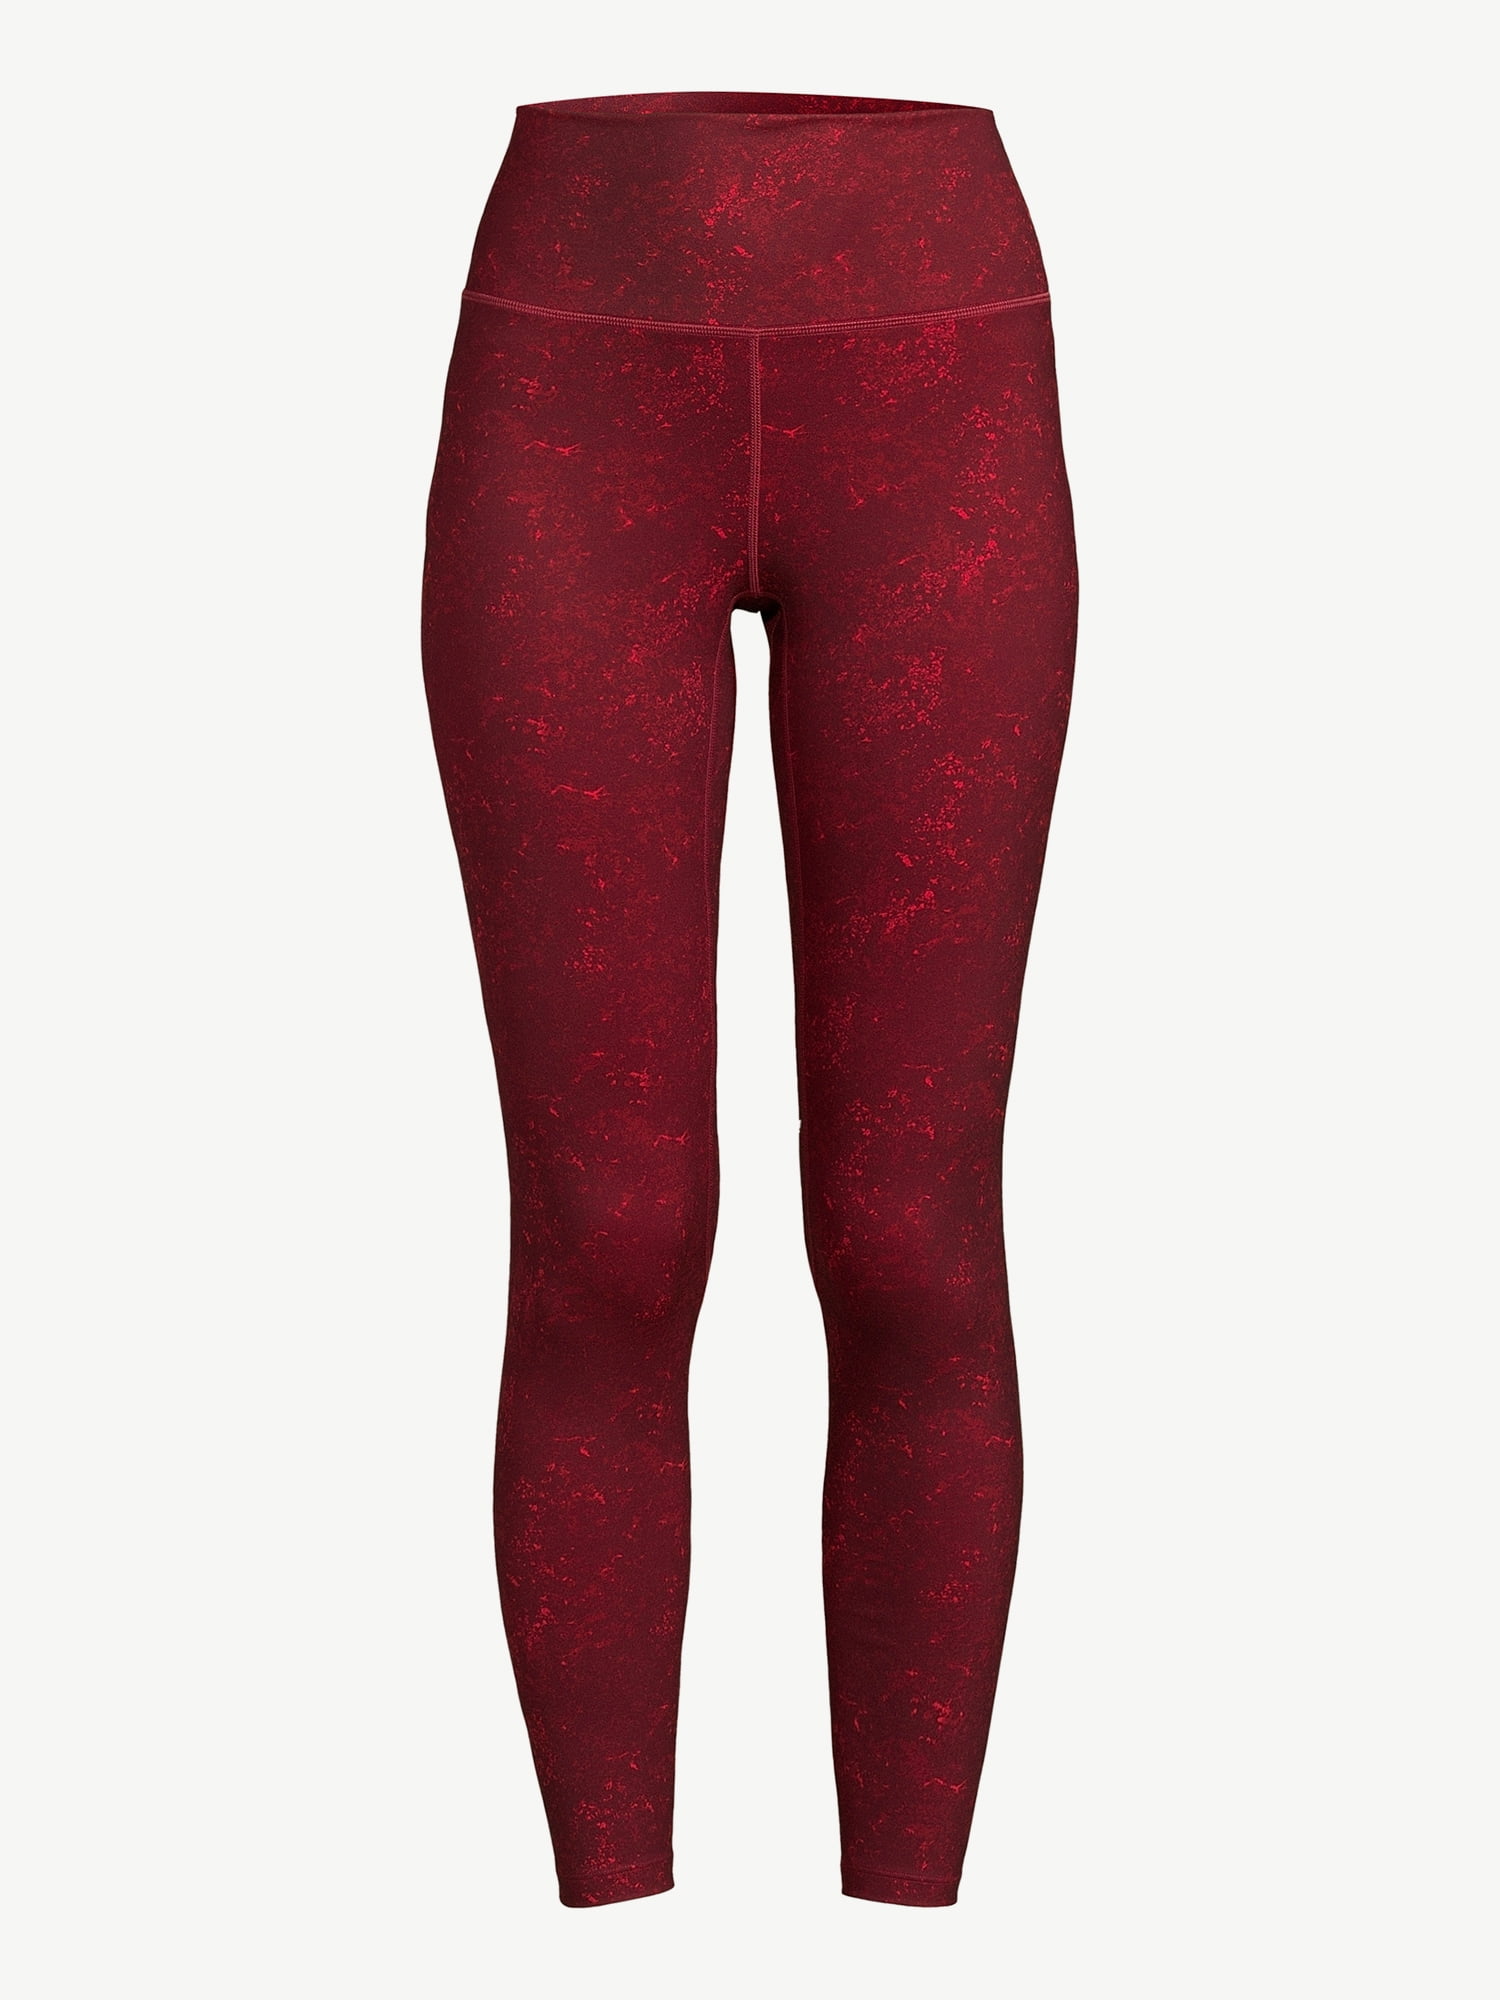 Women's Everyday Soft Ultra High-Rise Bootcut Leggings - All In Motion™  Burgundy 4X